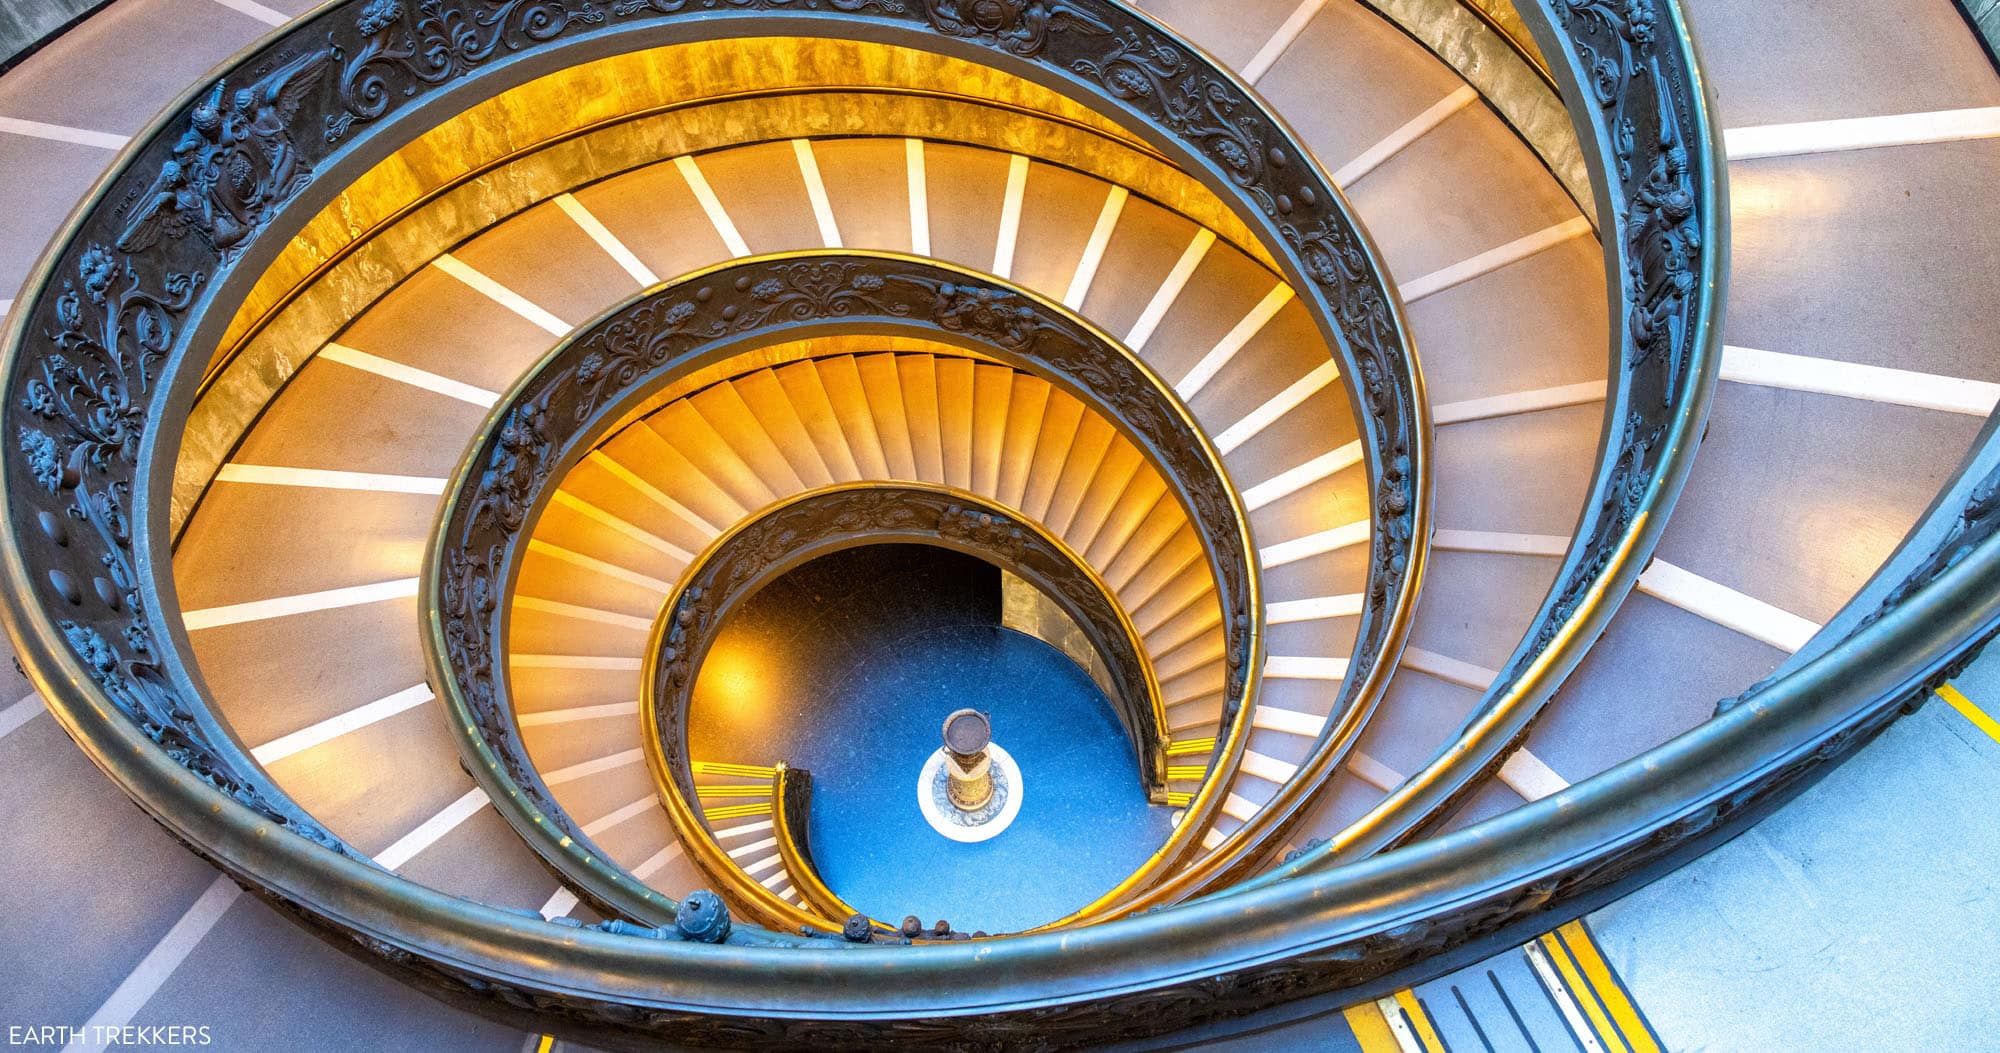 Featured image for “How to Visit the Vatican Museums & St. Peter’s Basilica in 2023”